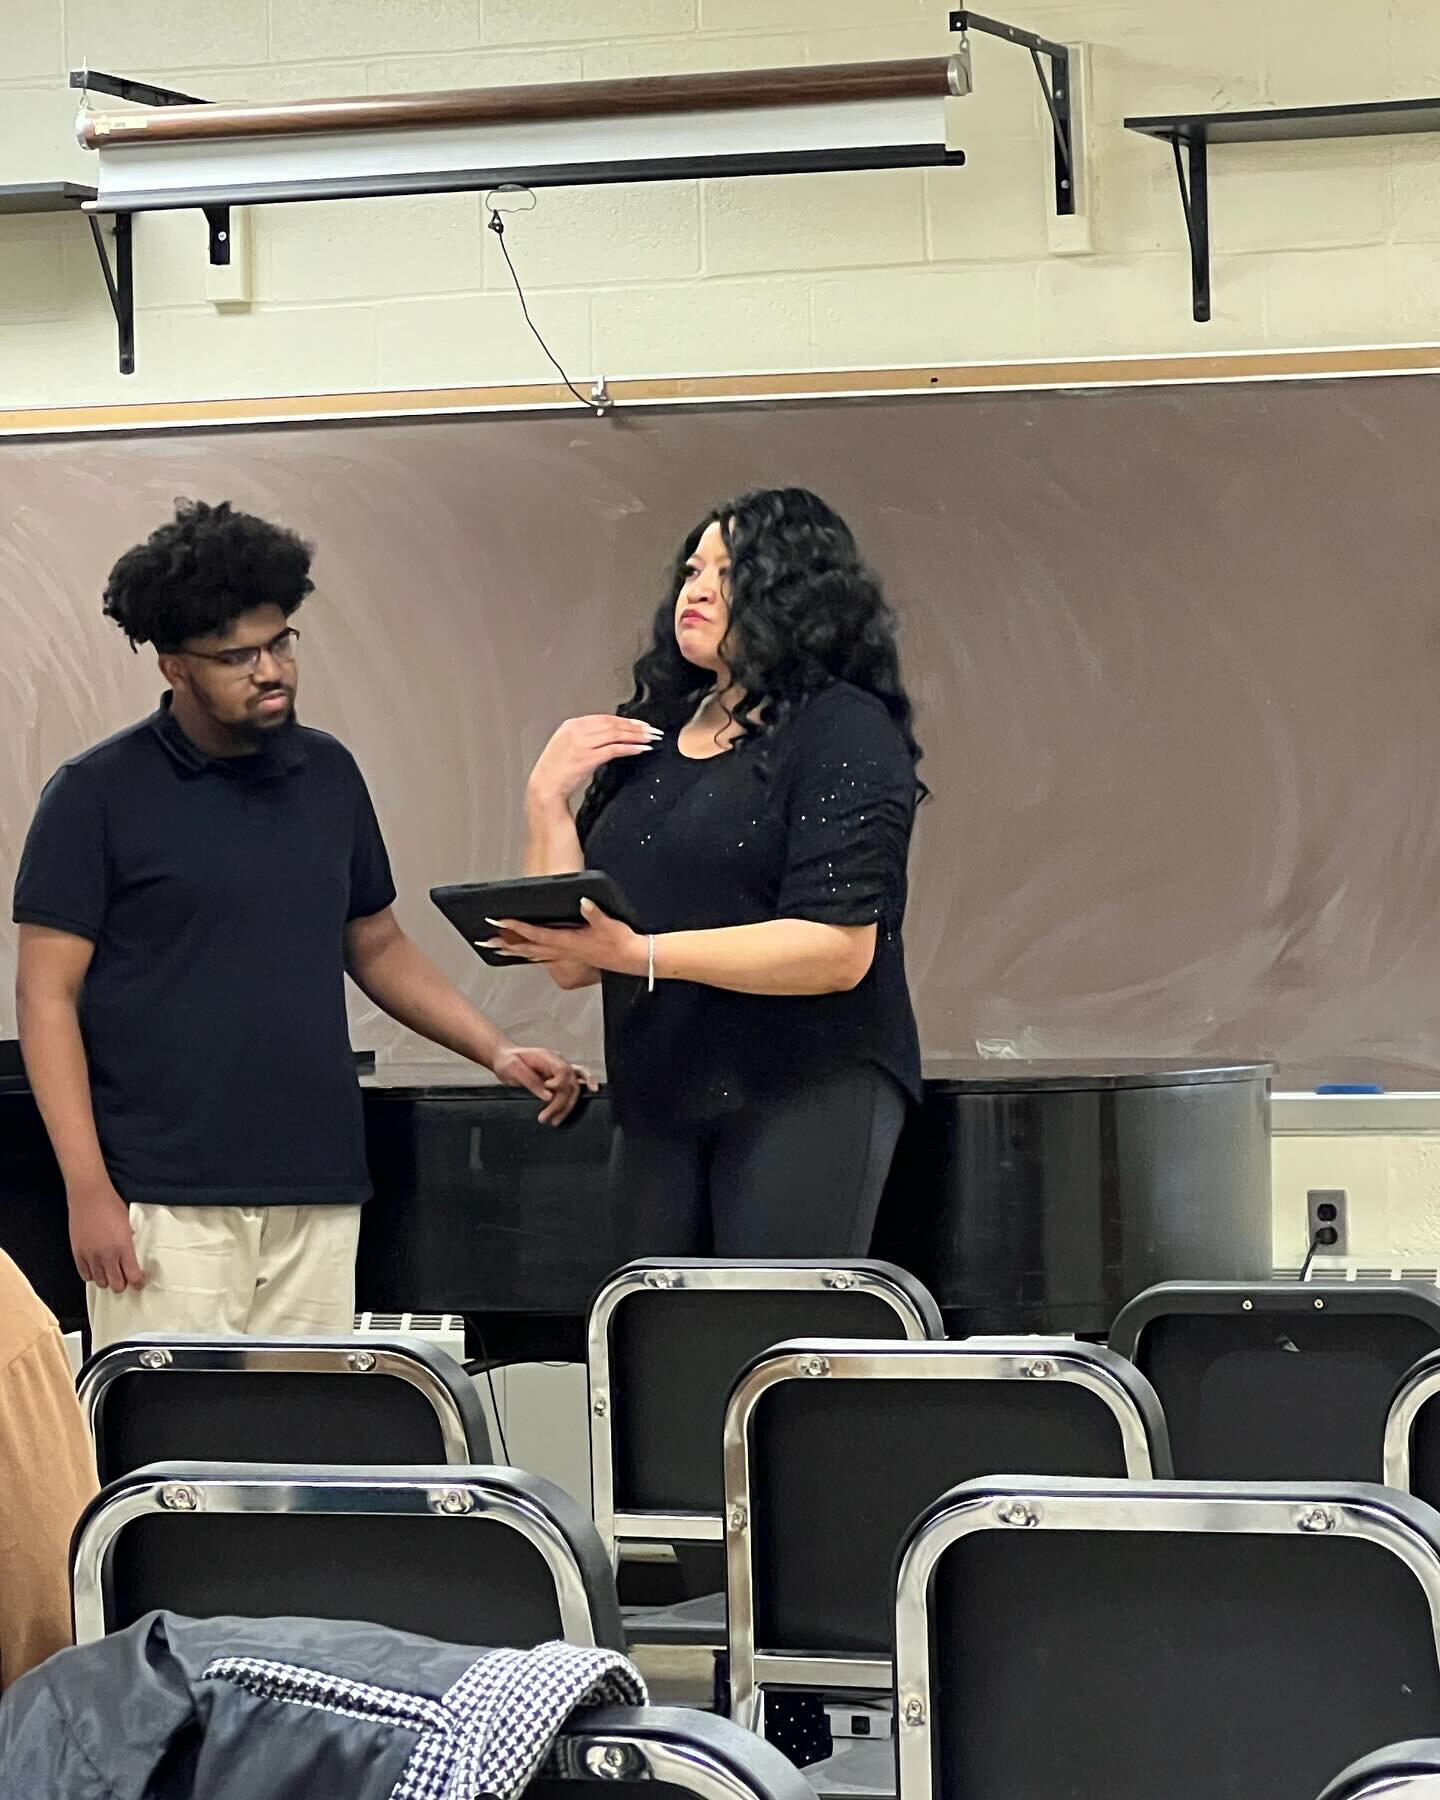 Morris &amp; Friends Masterclass #3.  Thank you @themichellebradleysoprano!🙏

And congratulations to @suitlandpeerforward!

Thank you @caapaarts for your partnership.